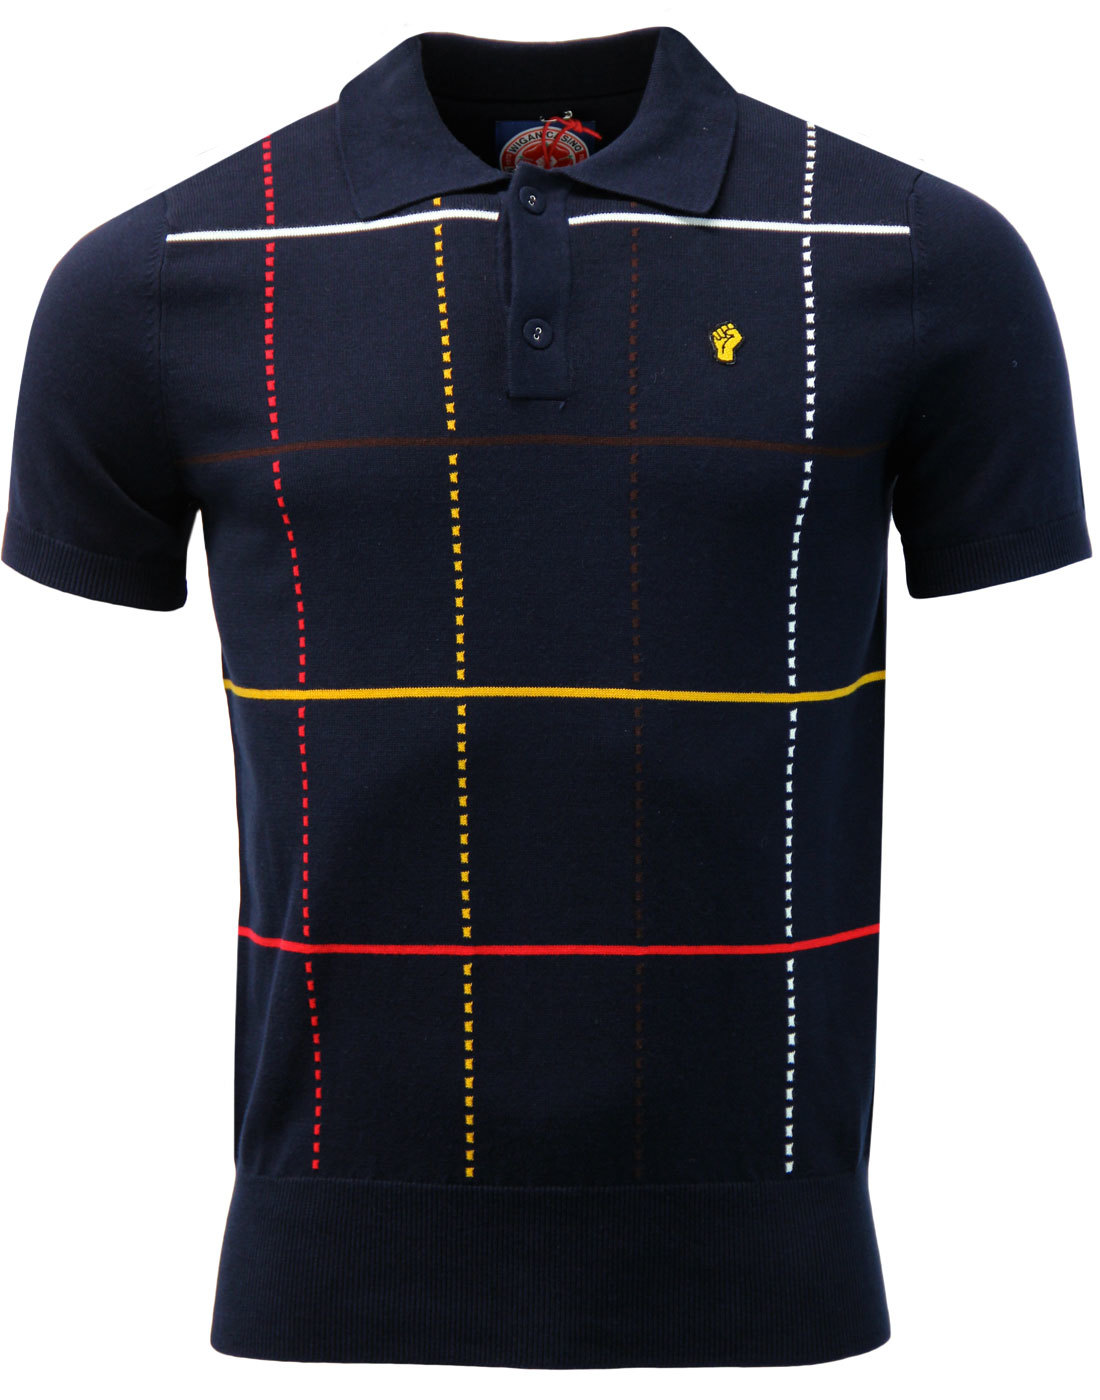 WIGAN CASINO Men's Northern Soul Mod Check Knit Polo Top in Navy